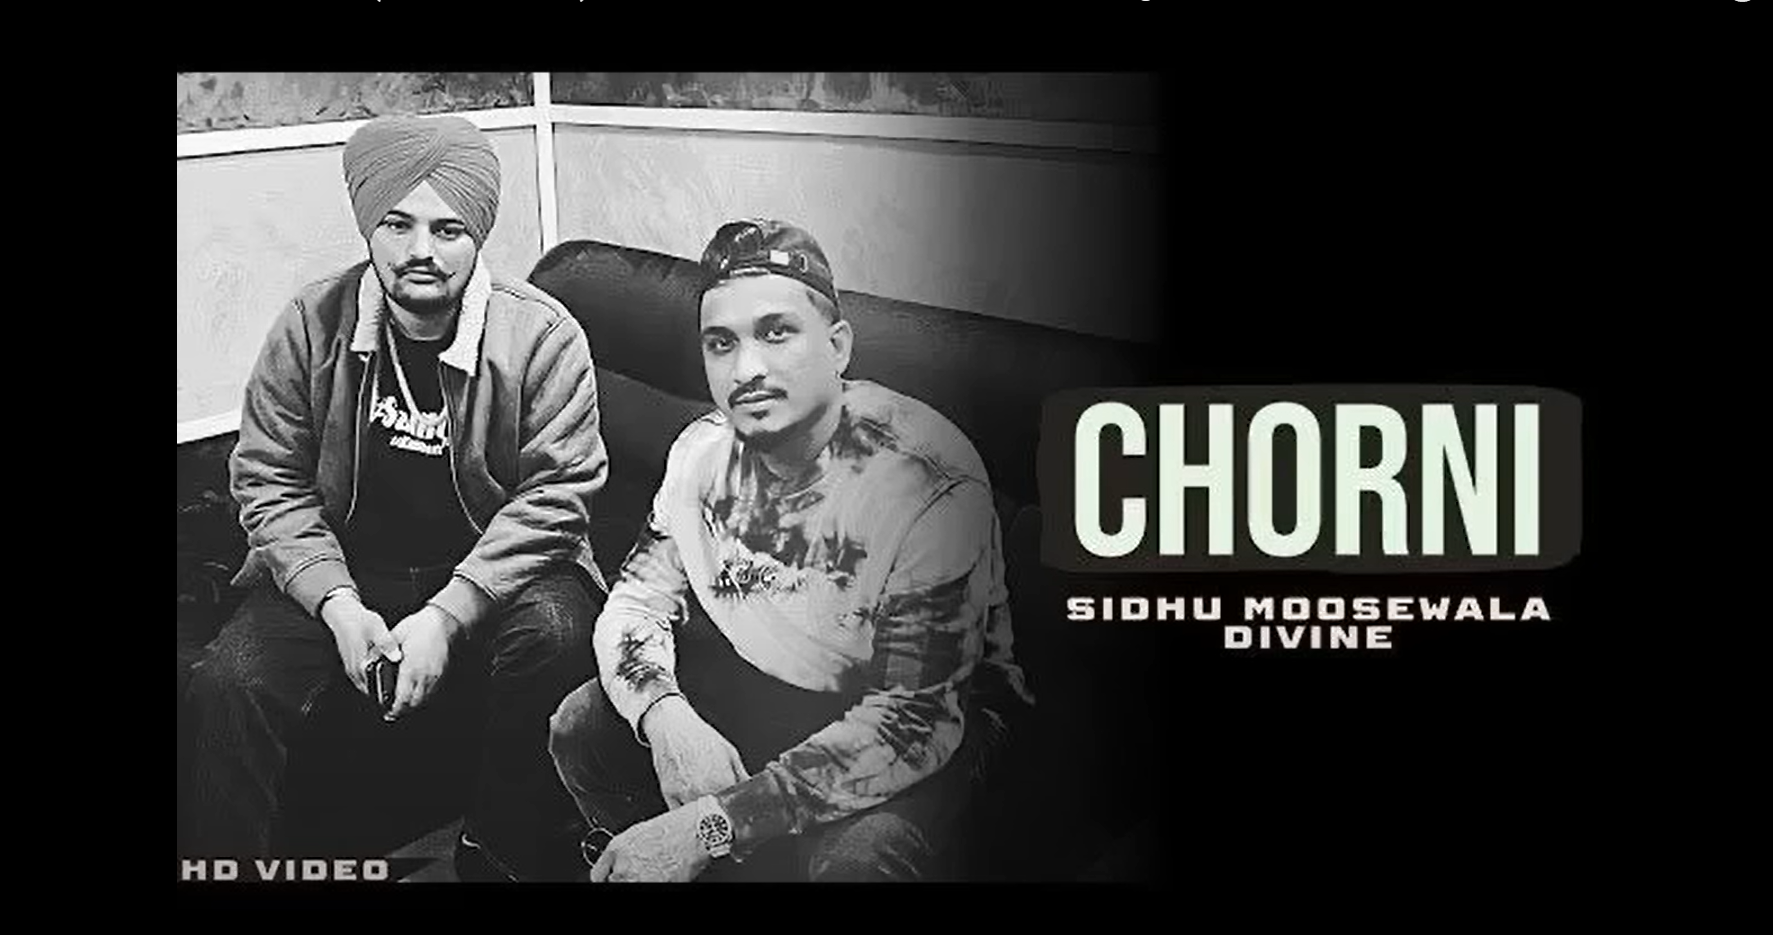 SIDHU MOOSE WALA, DIVINE - Chorni, Official Audio, Real-Time   Video View Count